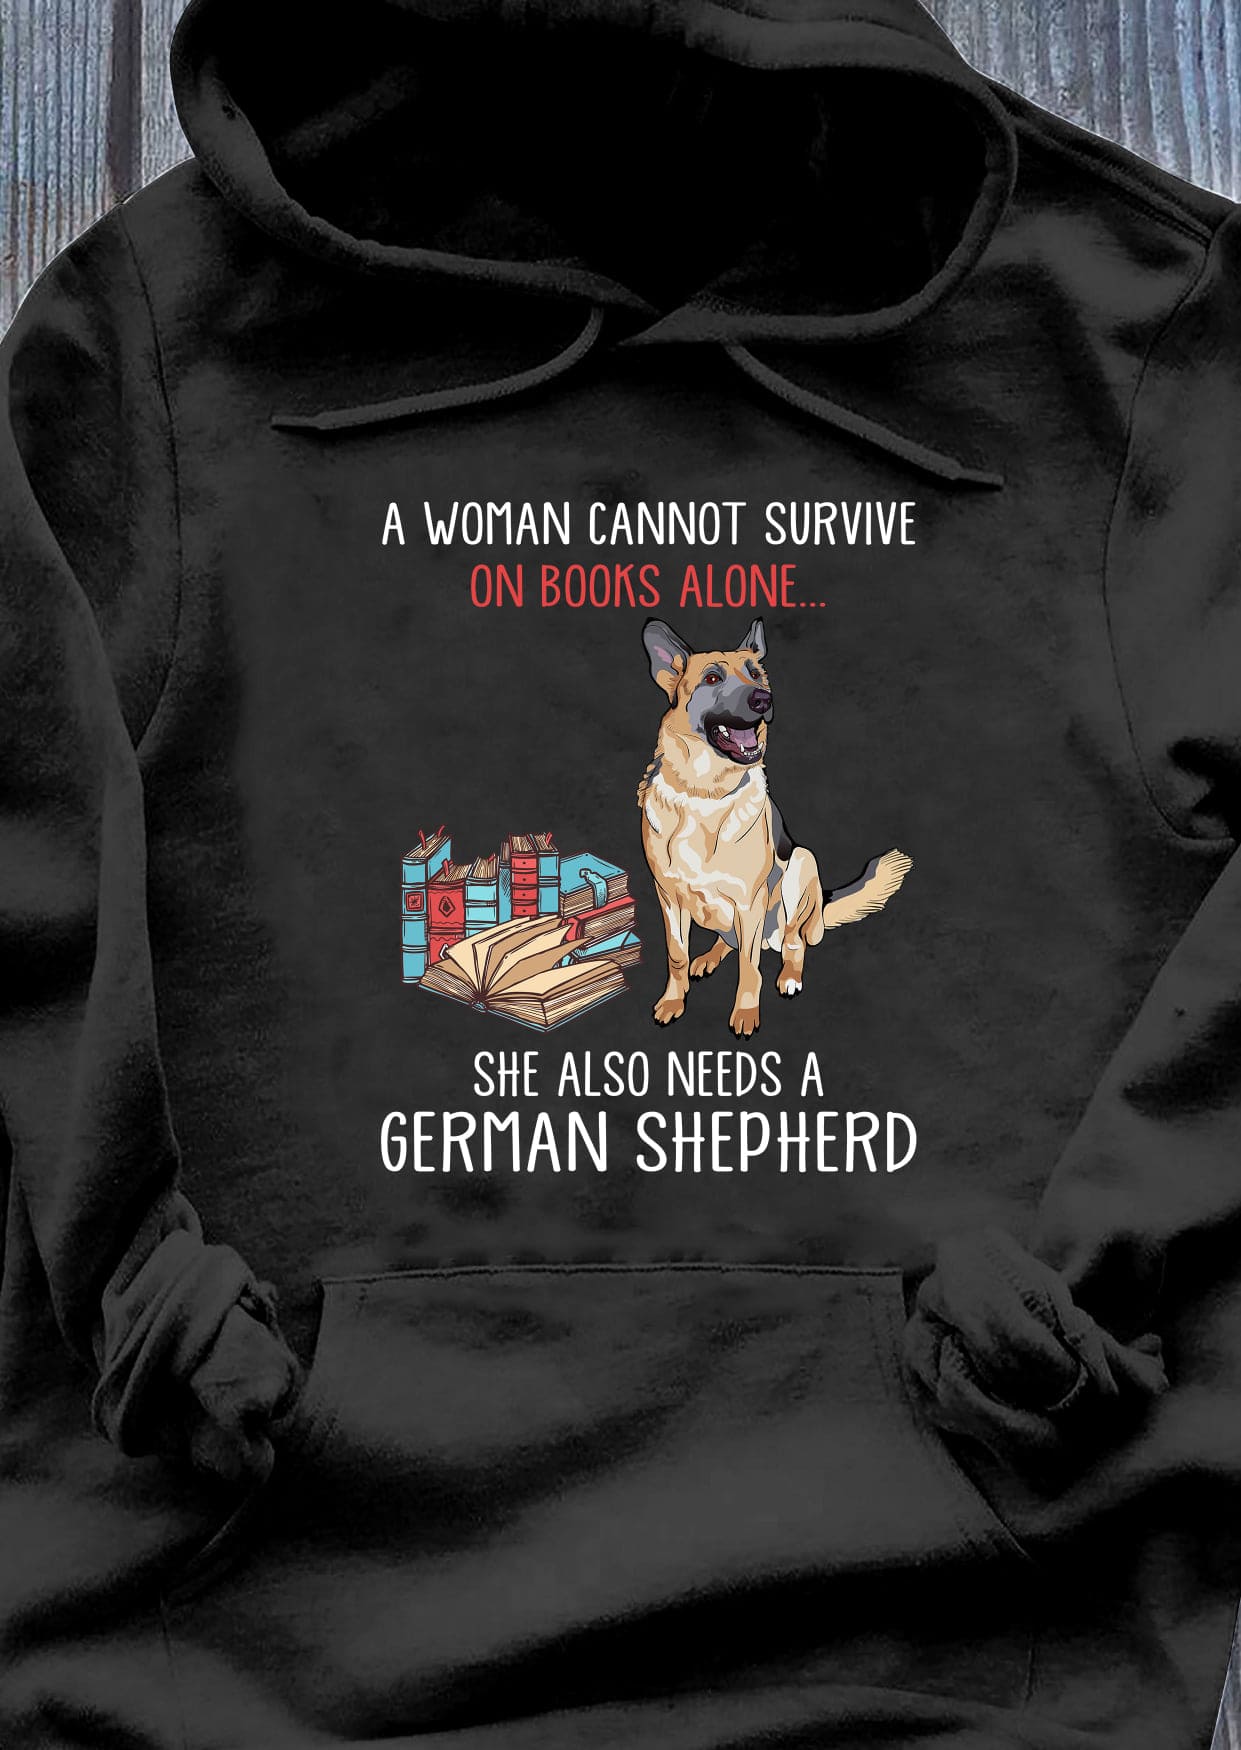 A woman cannot survive on books alone she also needs a German shepherd - Dogs and books